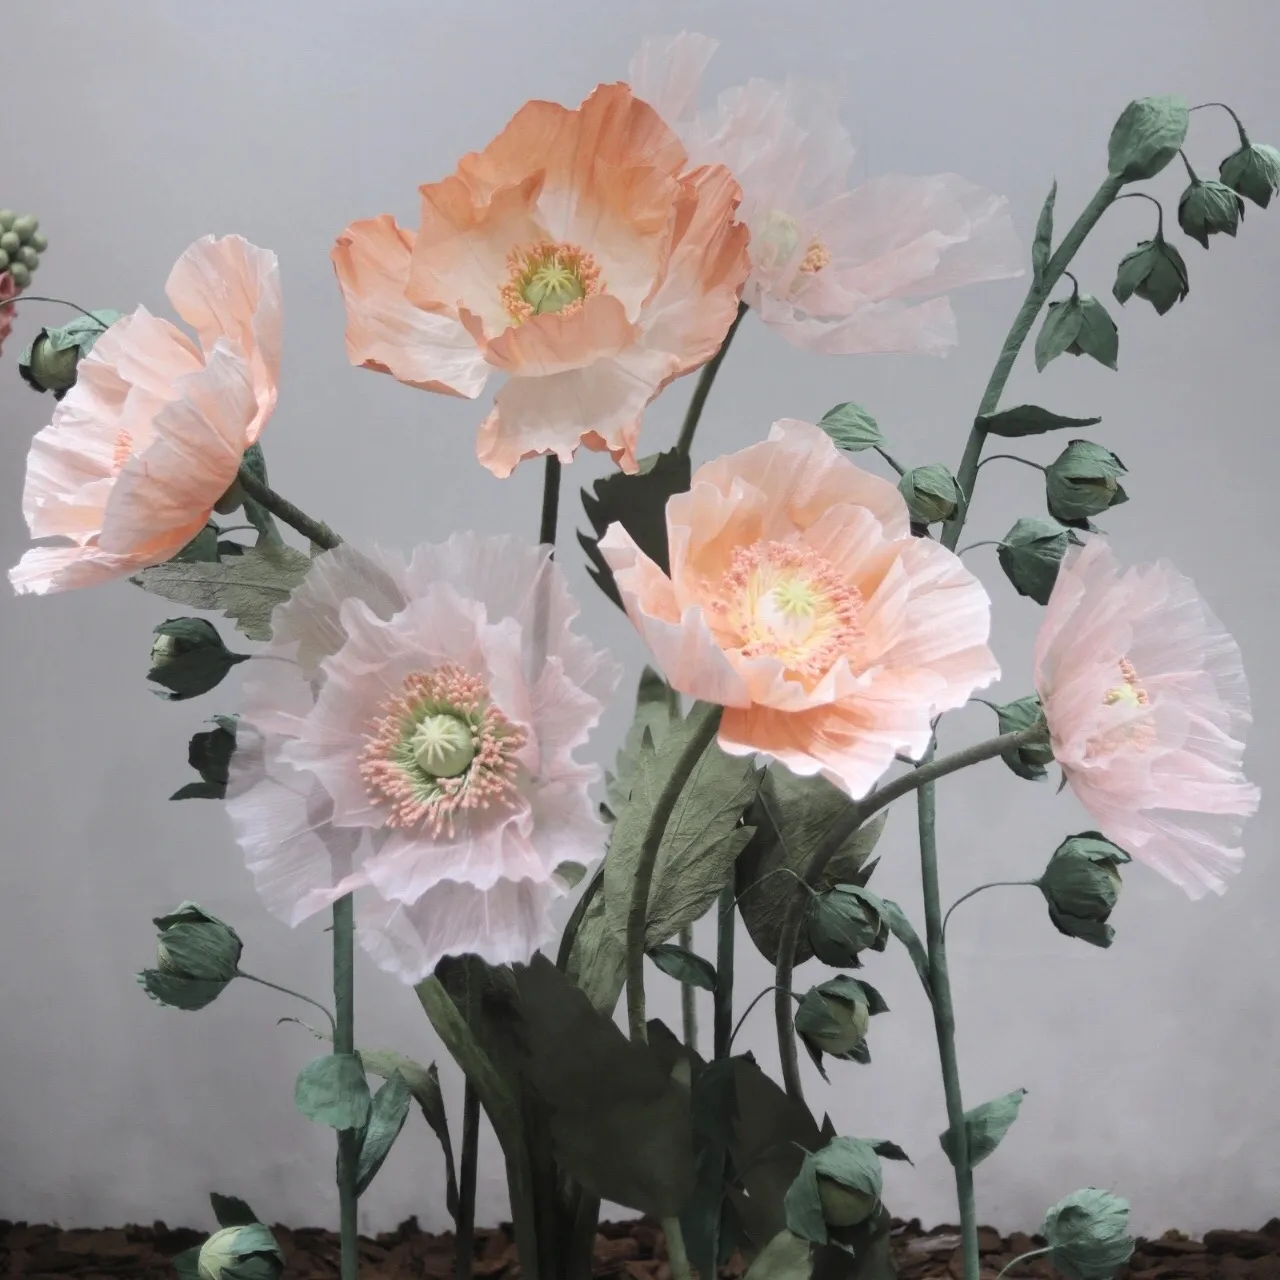 J-100 Handmade large paper flower pink white giant poppy flower stand for window decor Wedding party Floral decoration